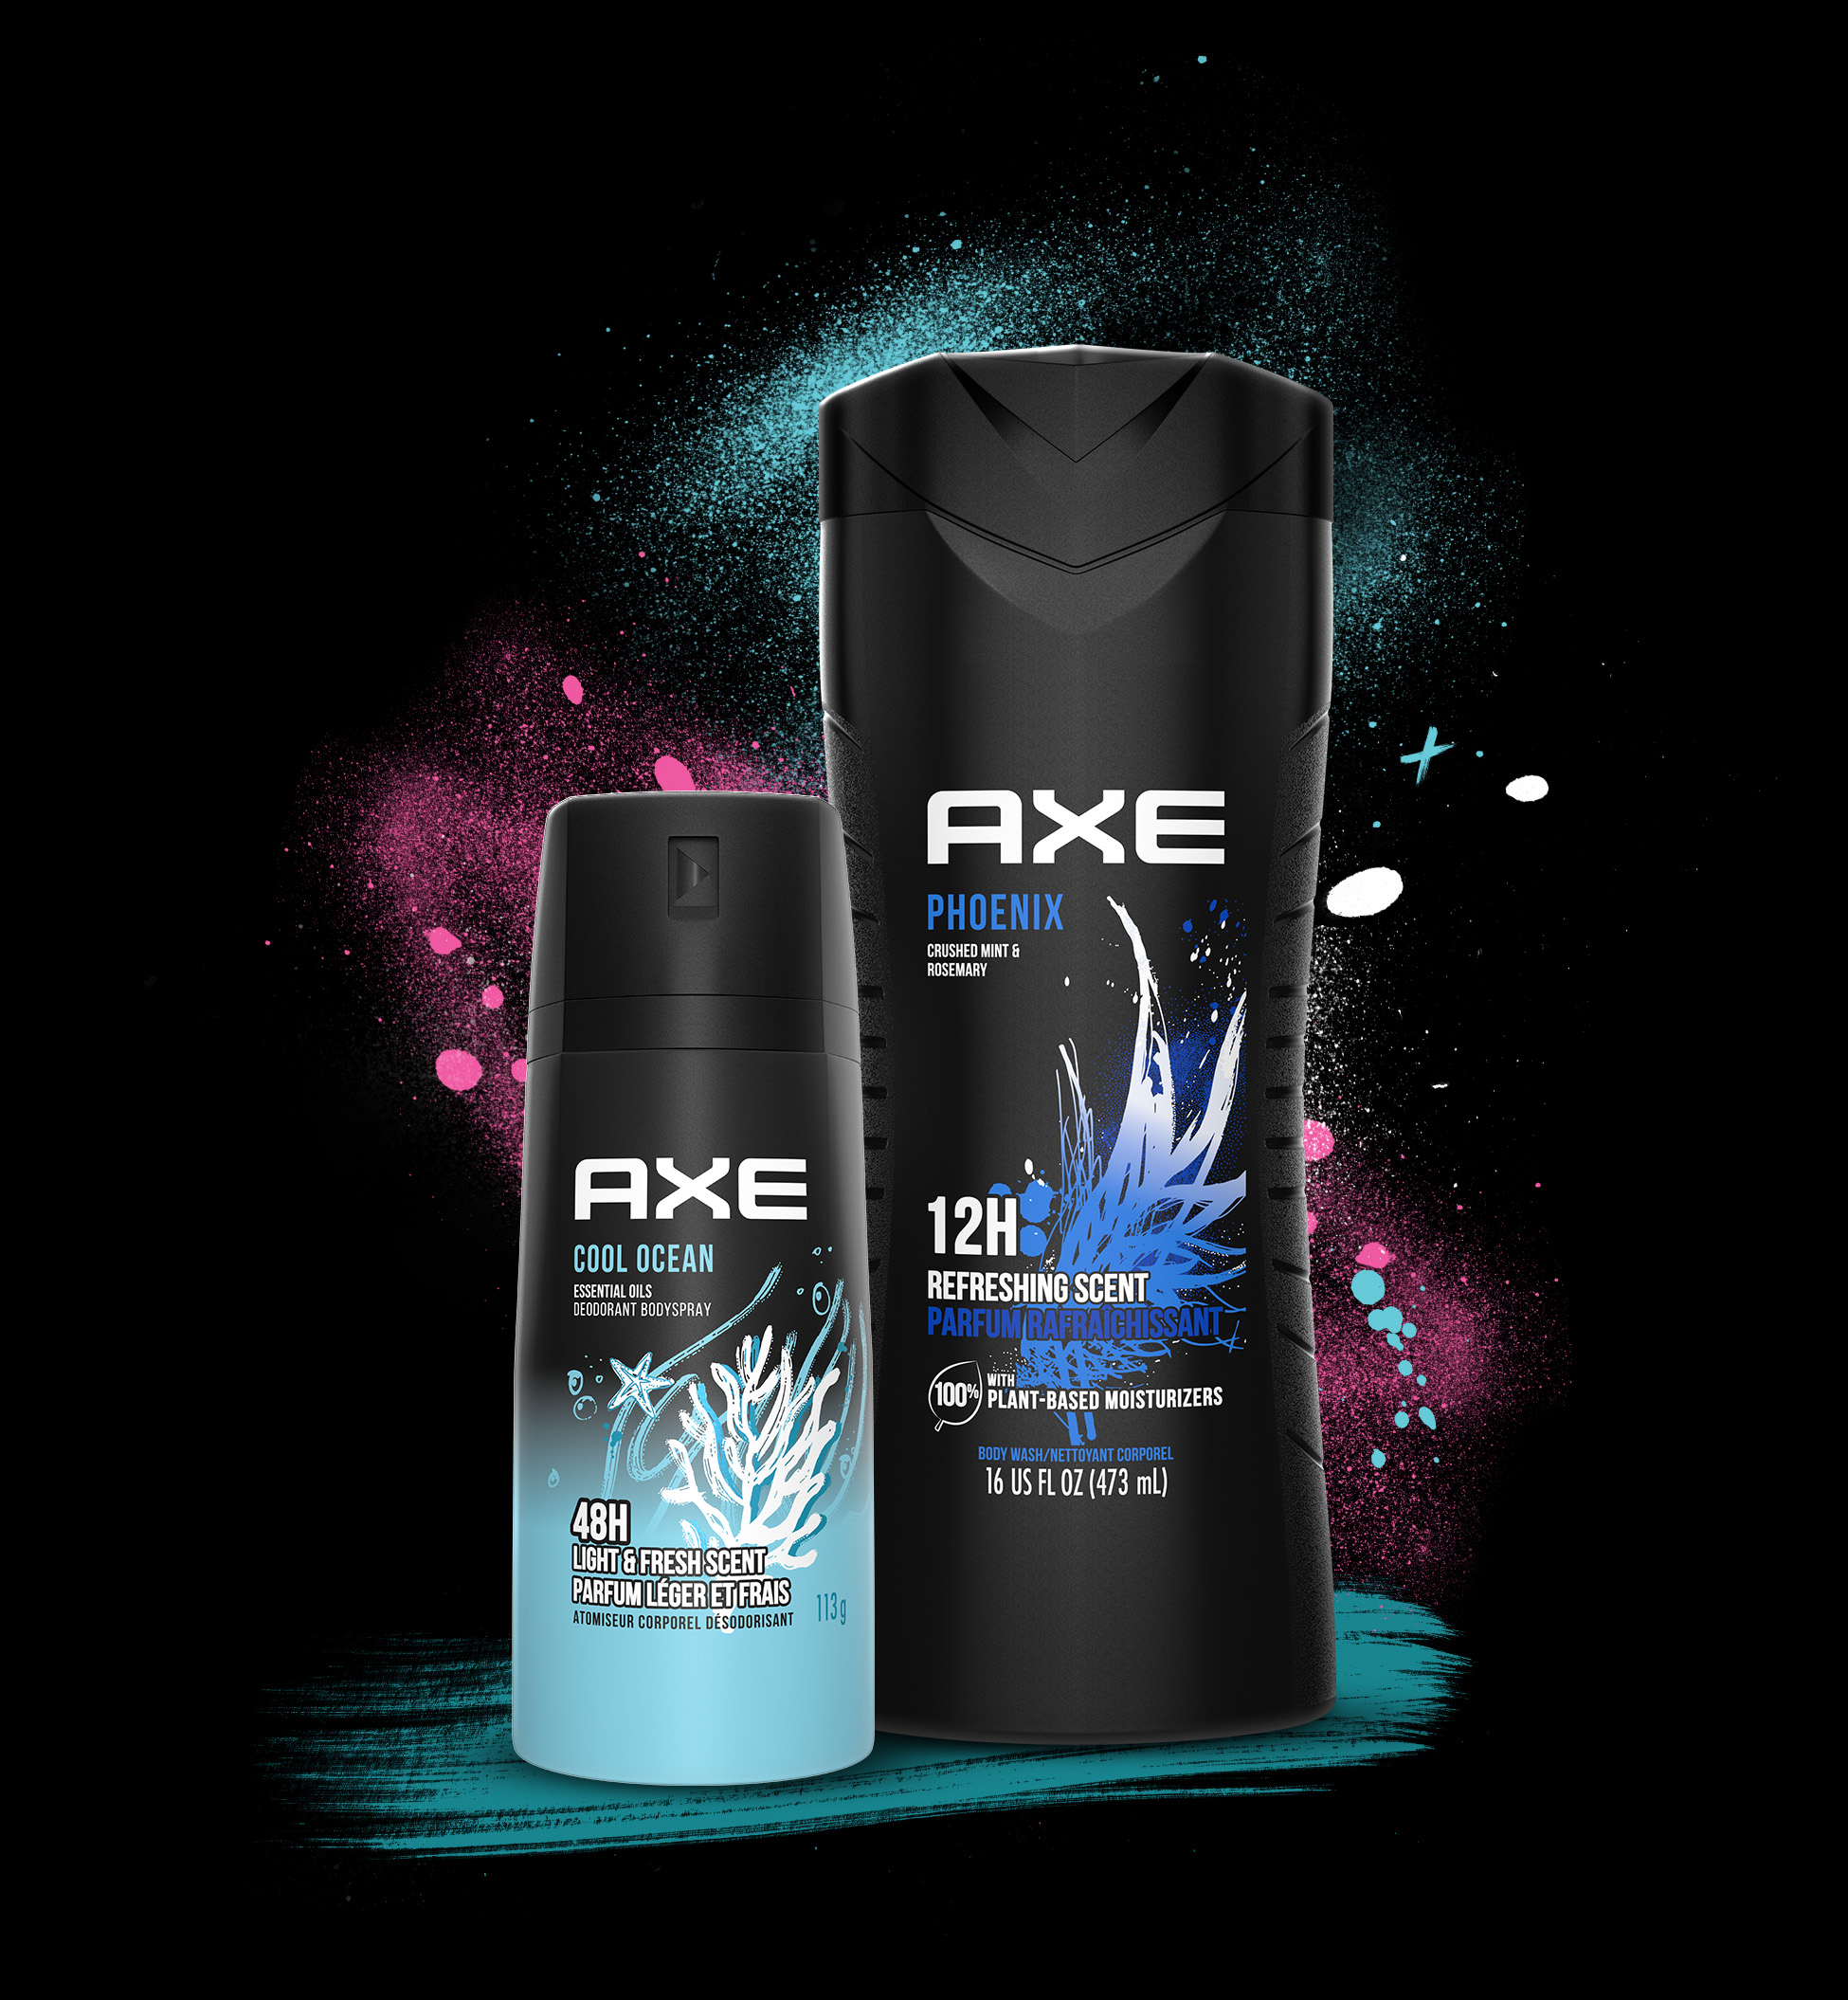 Axe Product Grouping